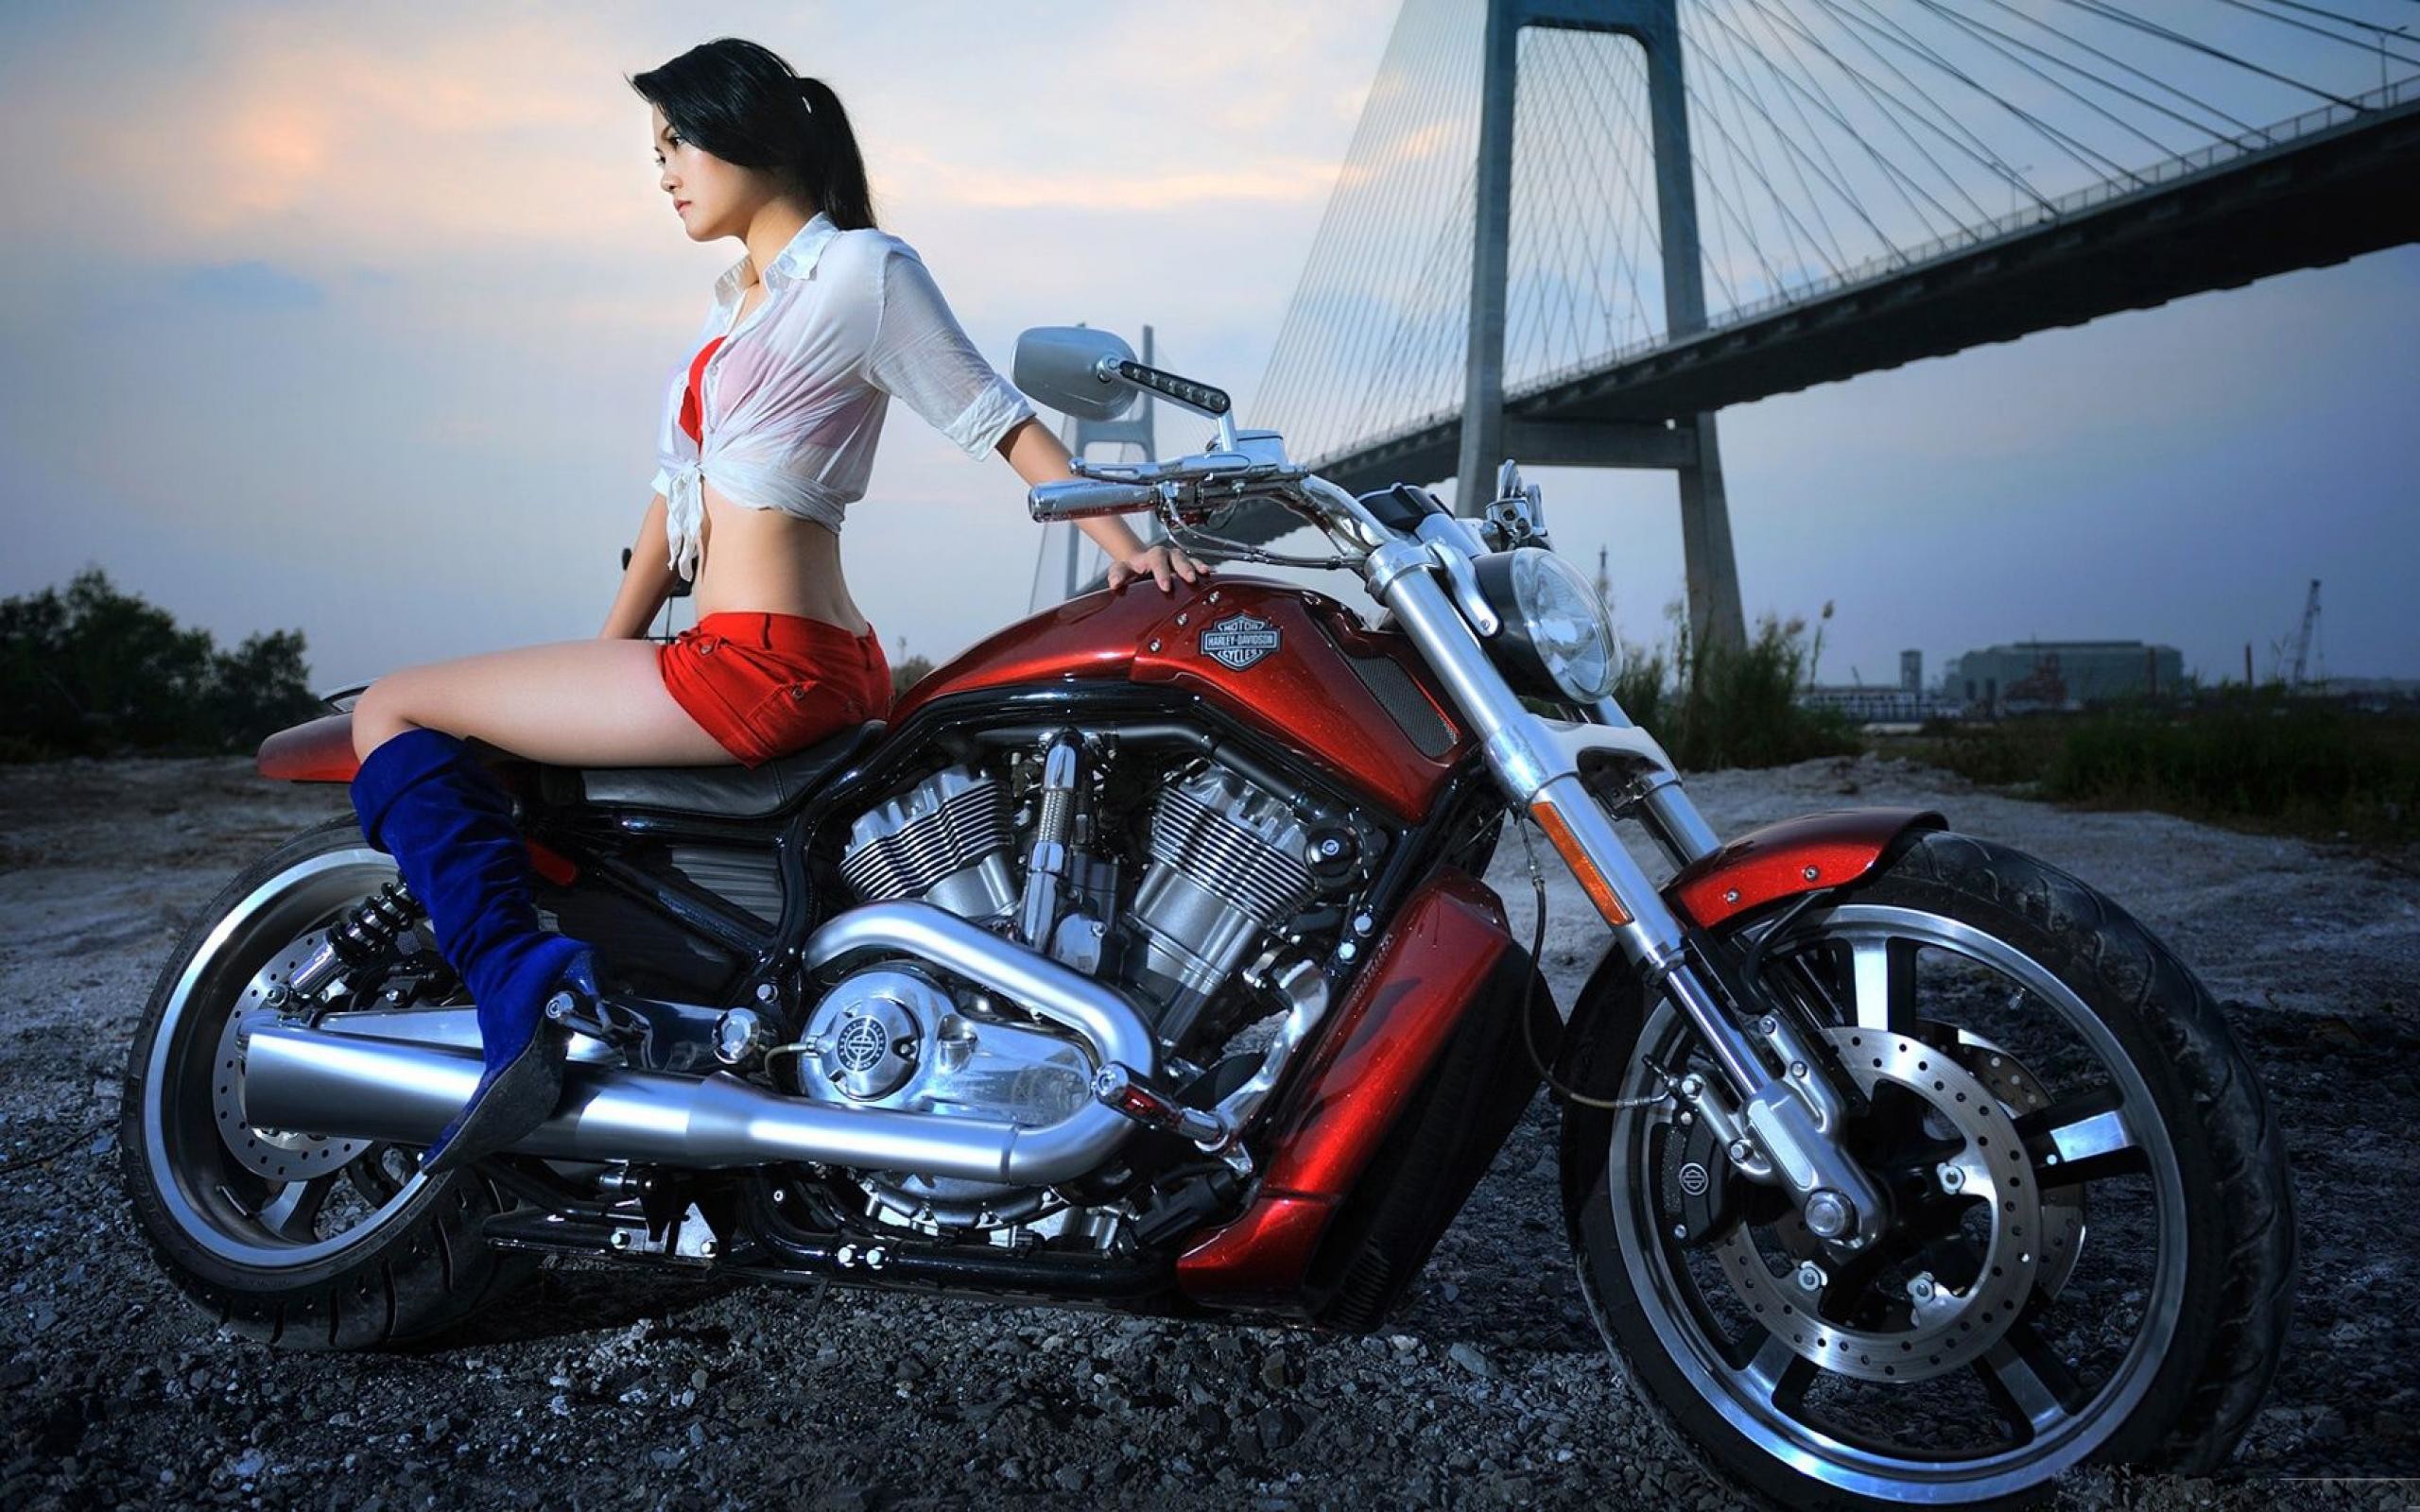 2560x1600 Hottest Harley Girls | ... Download Wallpapers Sexy Girls Music Harley  Davidson Motorcycles Best